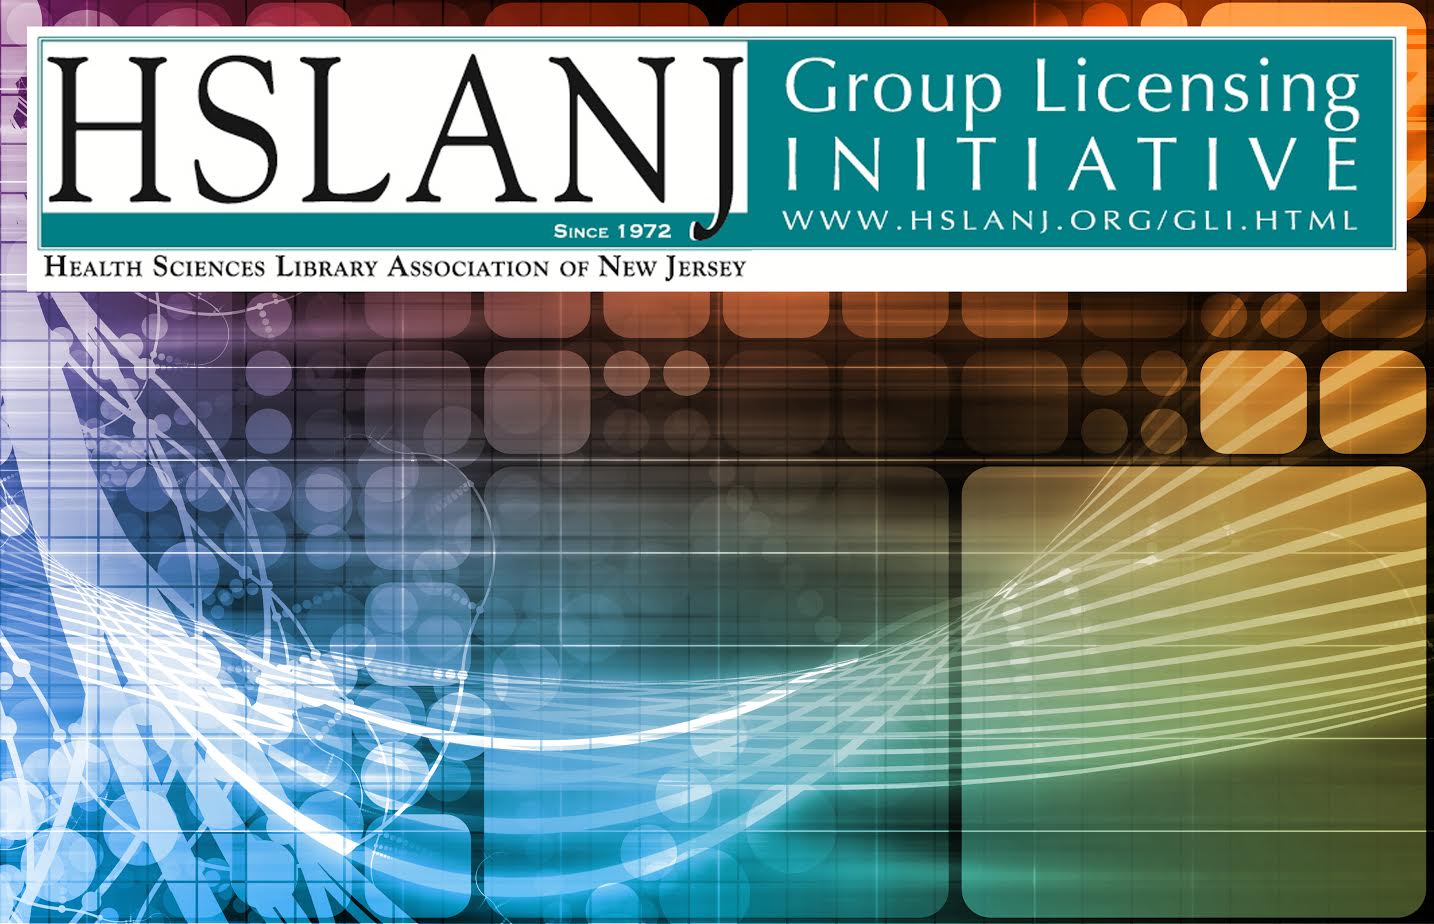 Coming Soon: The HSLANJ Group Licensing Initiative’s Fall Offer!